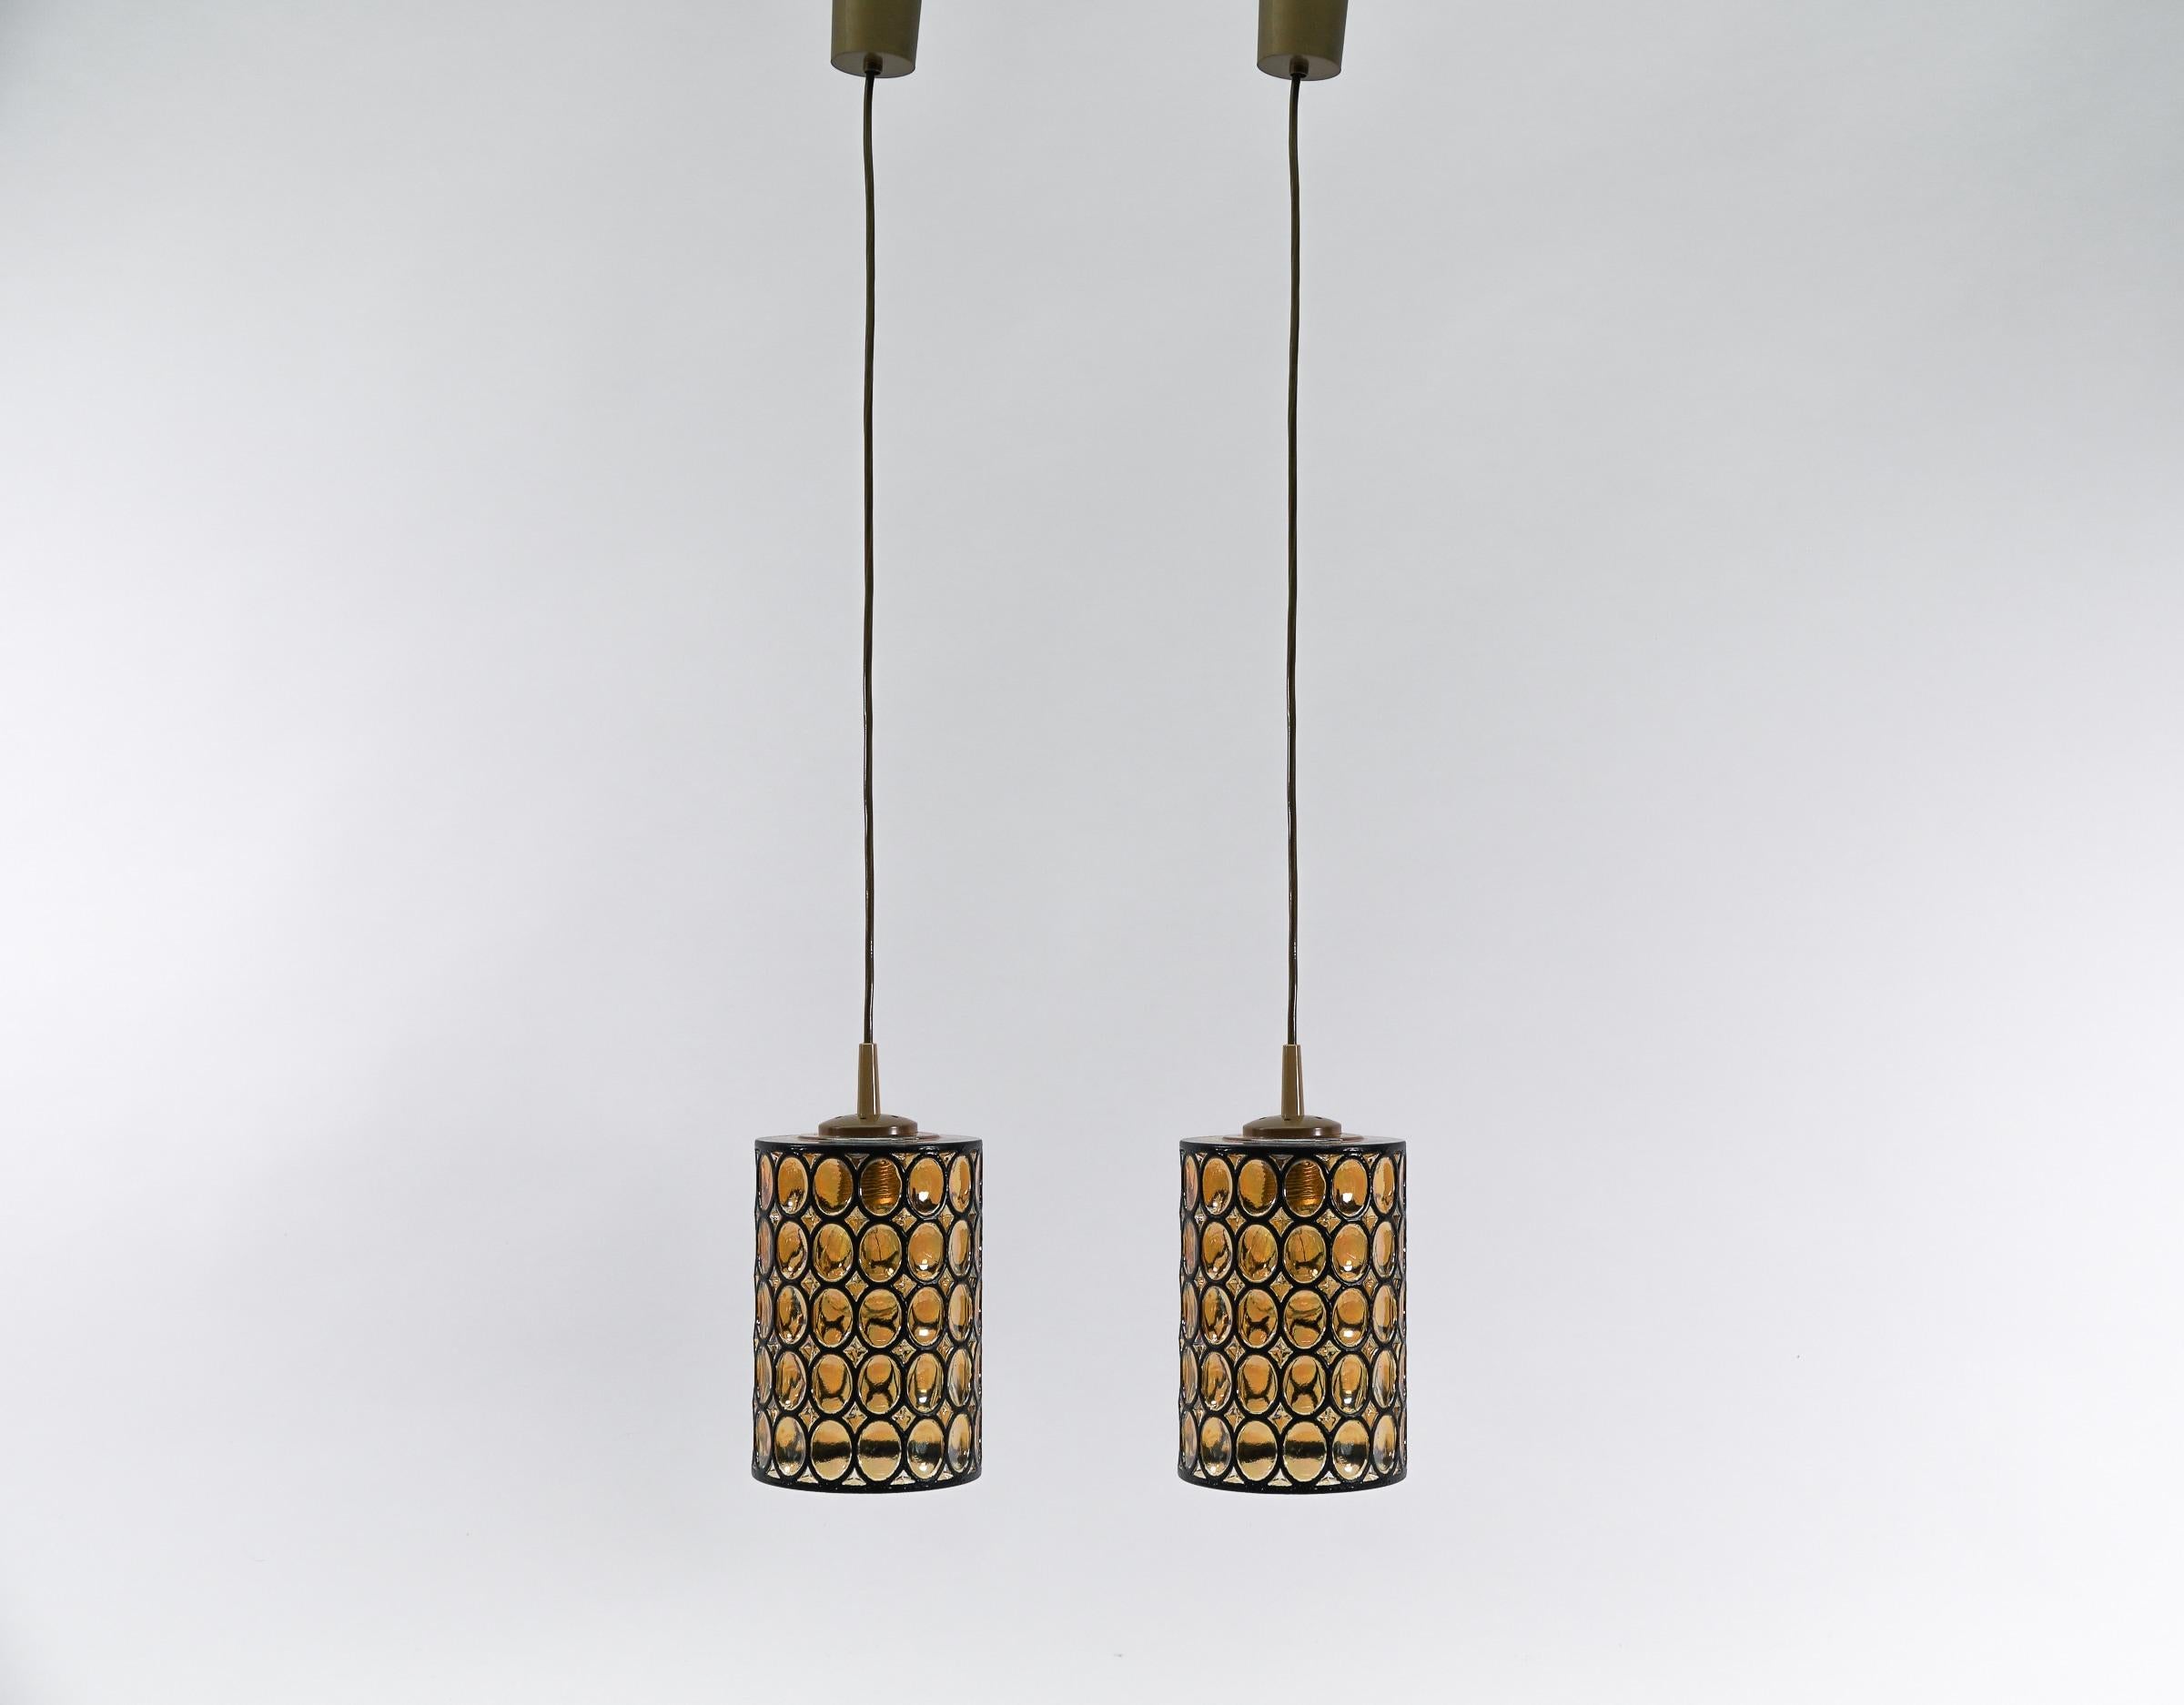 Vintage German pendant lamps in glass by Limburg. E27 socket. 

Fully functional. 

Executed in glass, each lamp needs 1 x E27 / E26 Edison screw fit bulb, is wired, in working condition and runs both on 110 / 230 volt.

Our lamps are checked,